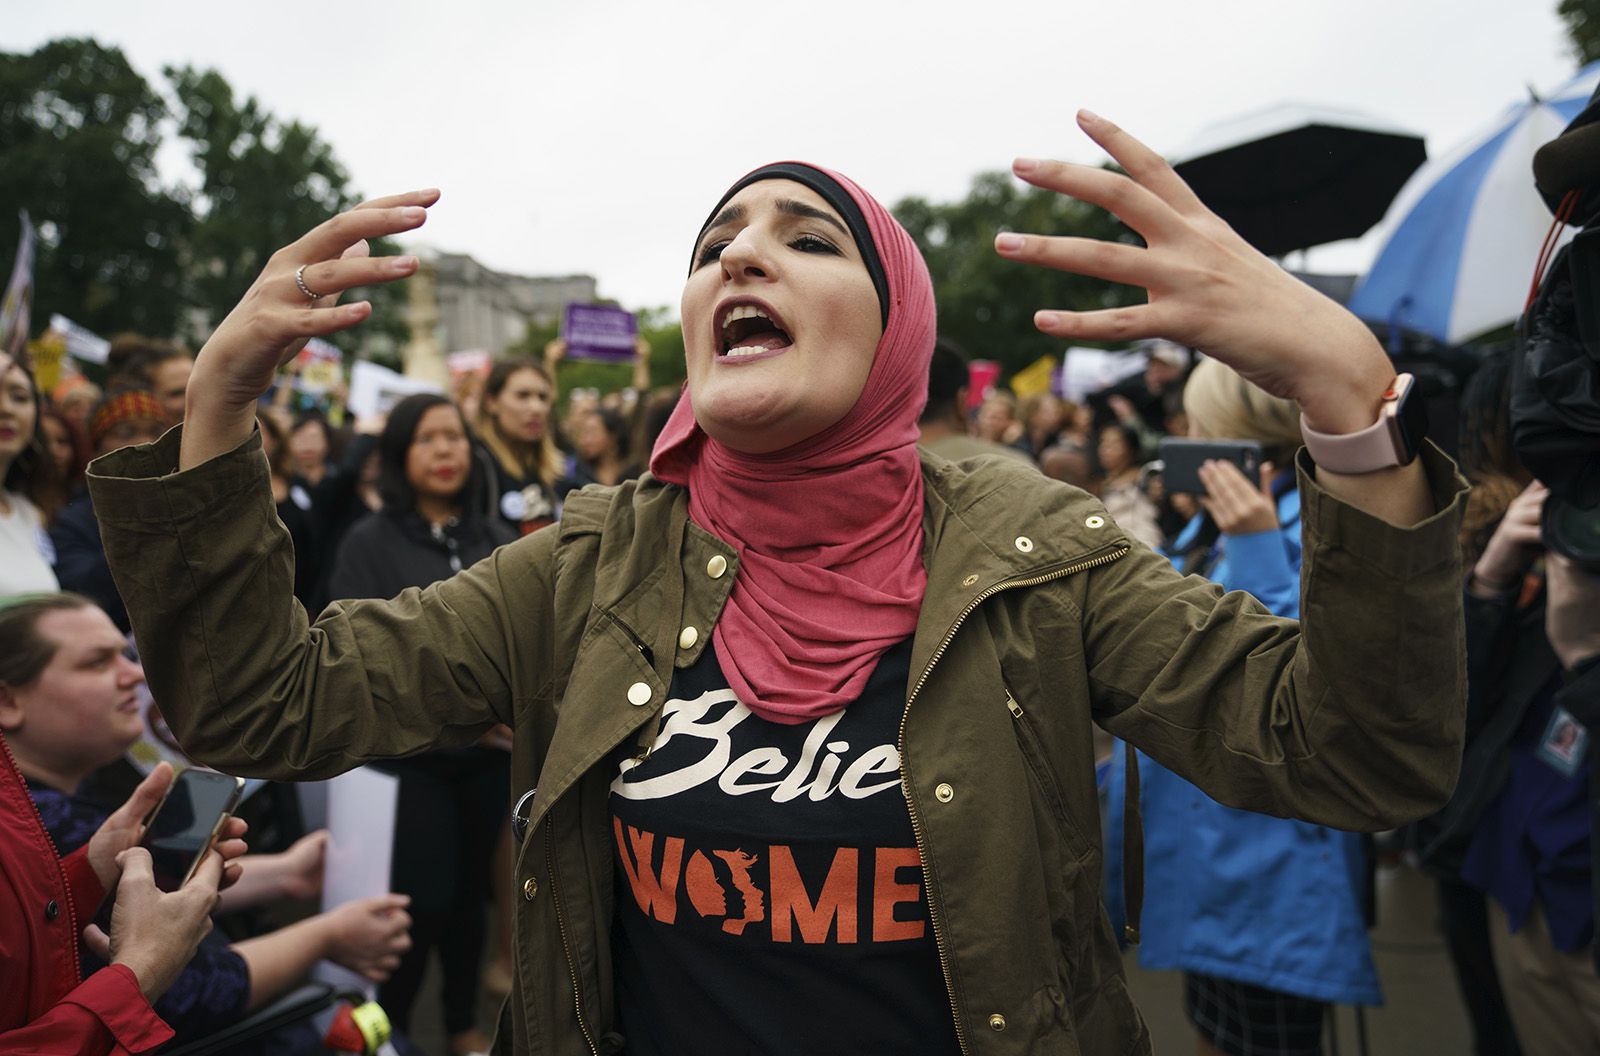 Linda Sarsour, with the Women’s March, calls out to other activists opposed to President Donald Trump’s embattled Supreme Court nominee, Brett Kavanaugh, in front of the Supreme Court on Capitol Hill in Washington, on Sept. 24, 2018. (AP Photo/Carolyn Kaster)